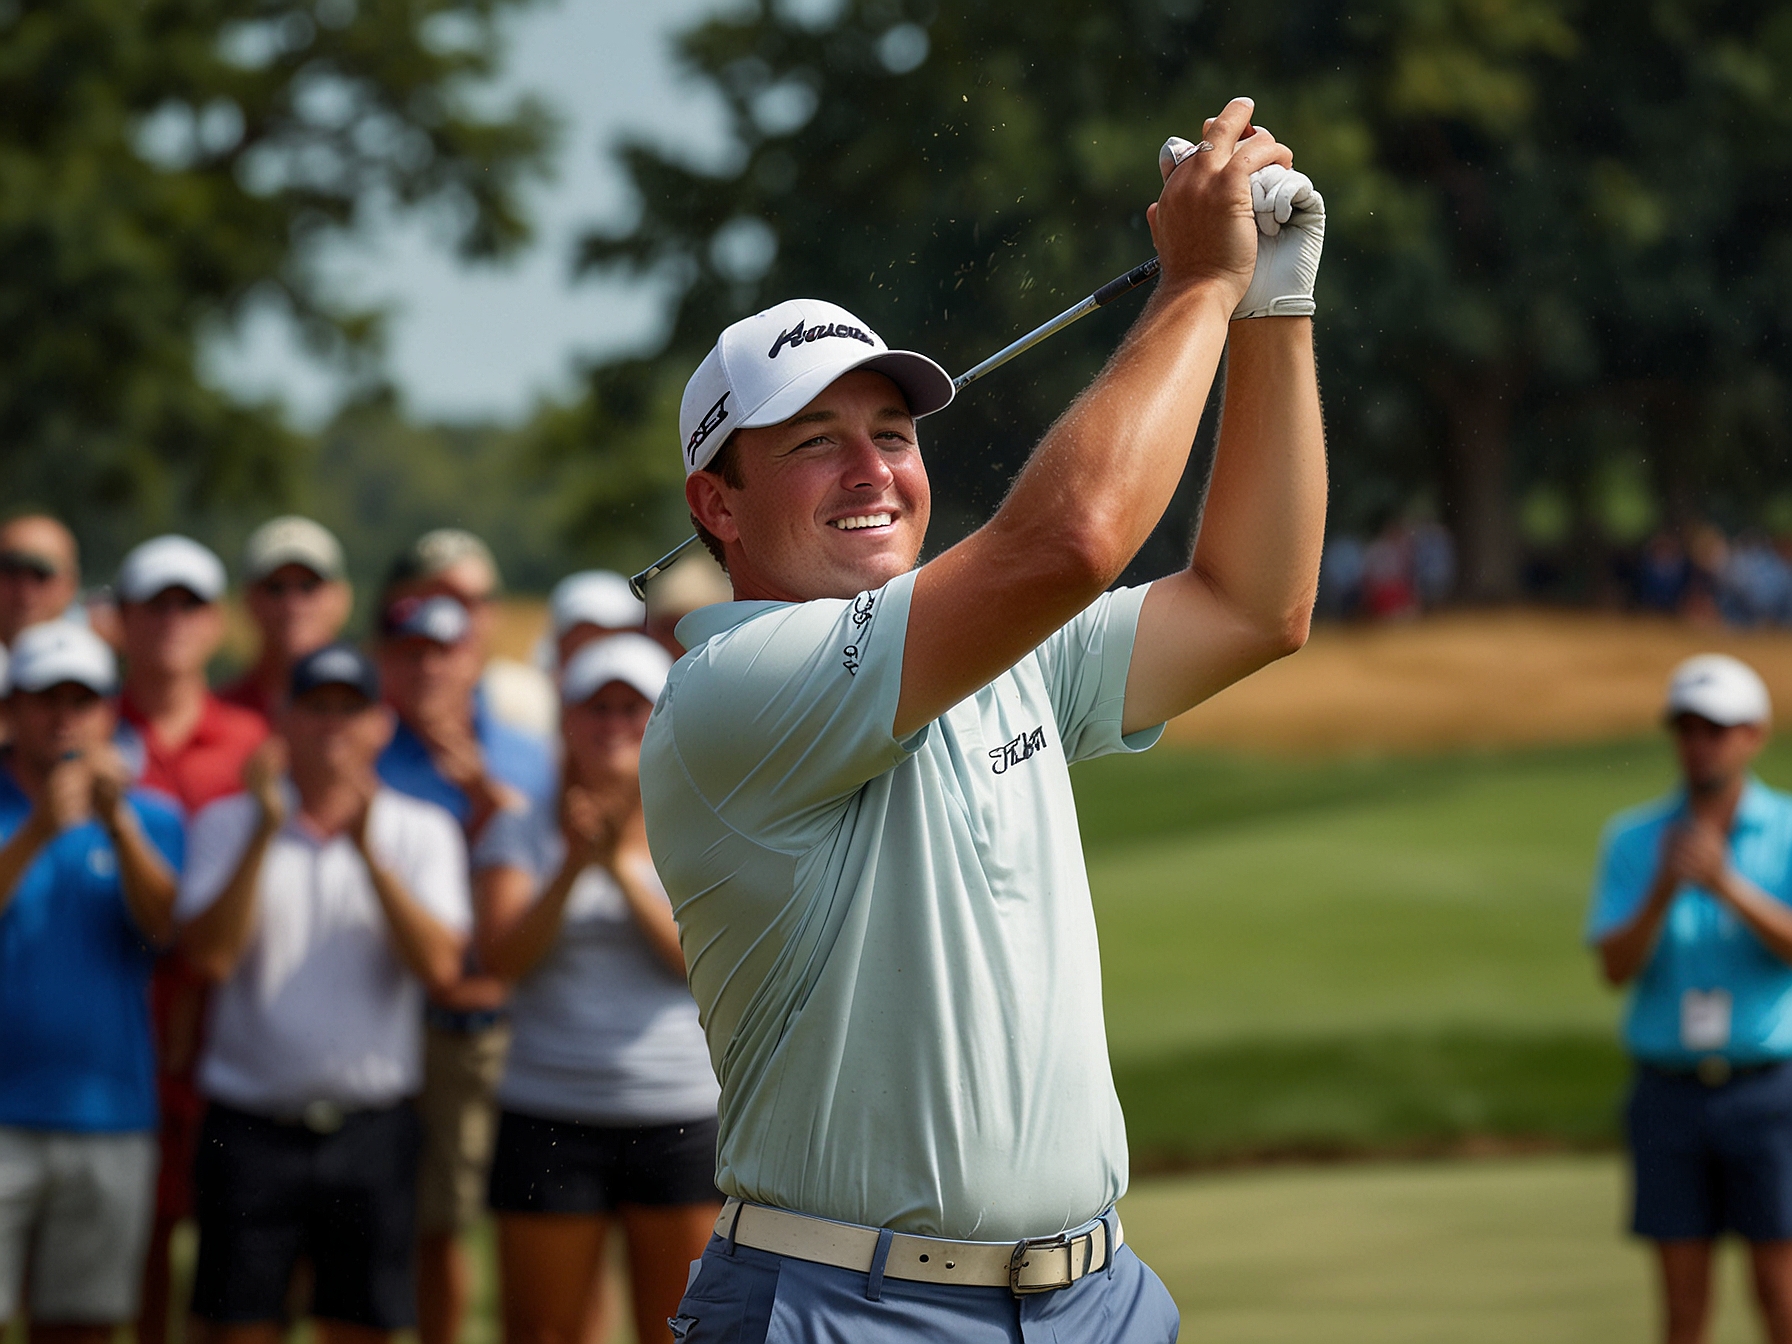 Cameron Young celebrates after shooting a 59 at the Travelers Championship, marking a historic moment as the first sub-60 round in nearly four years on the PGA Tour.